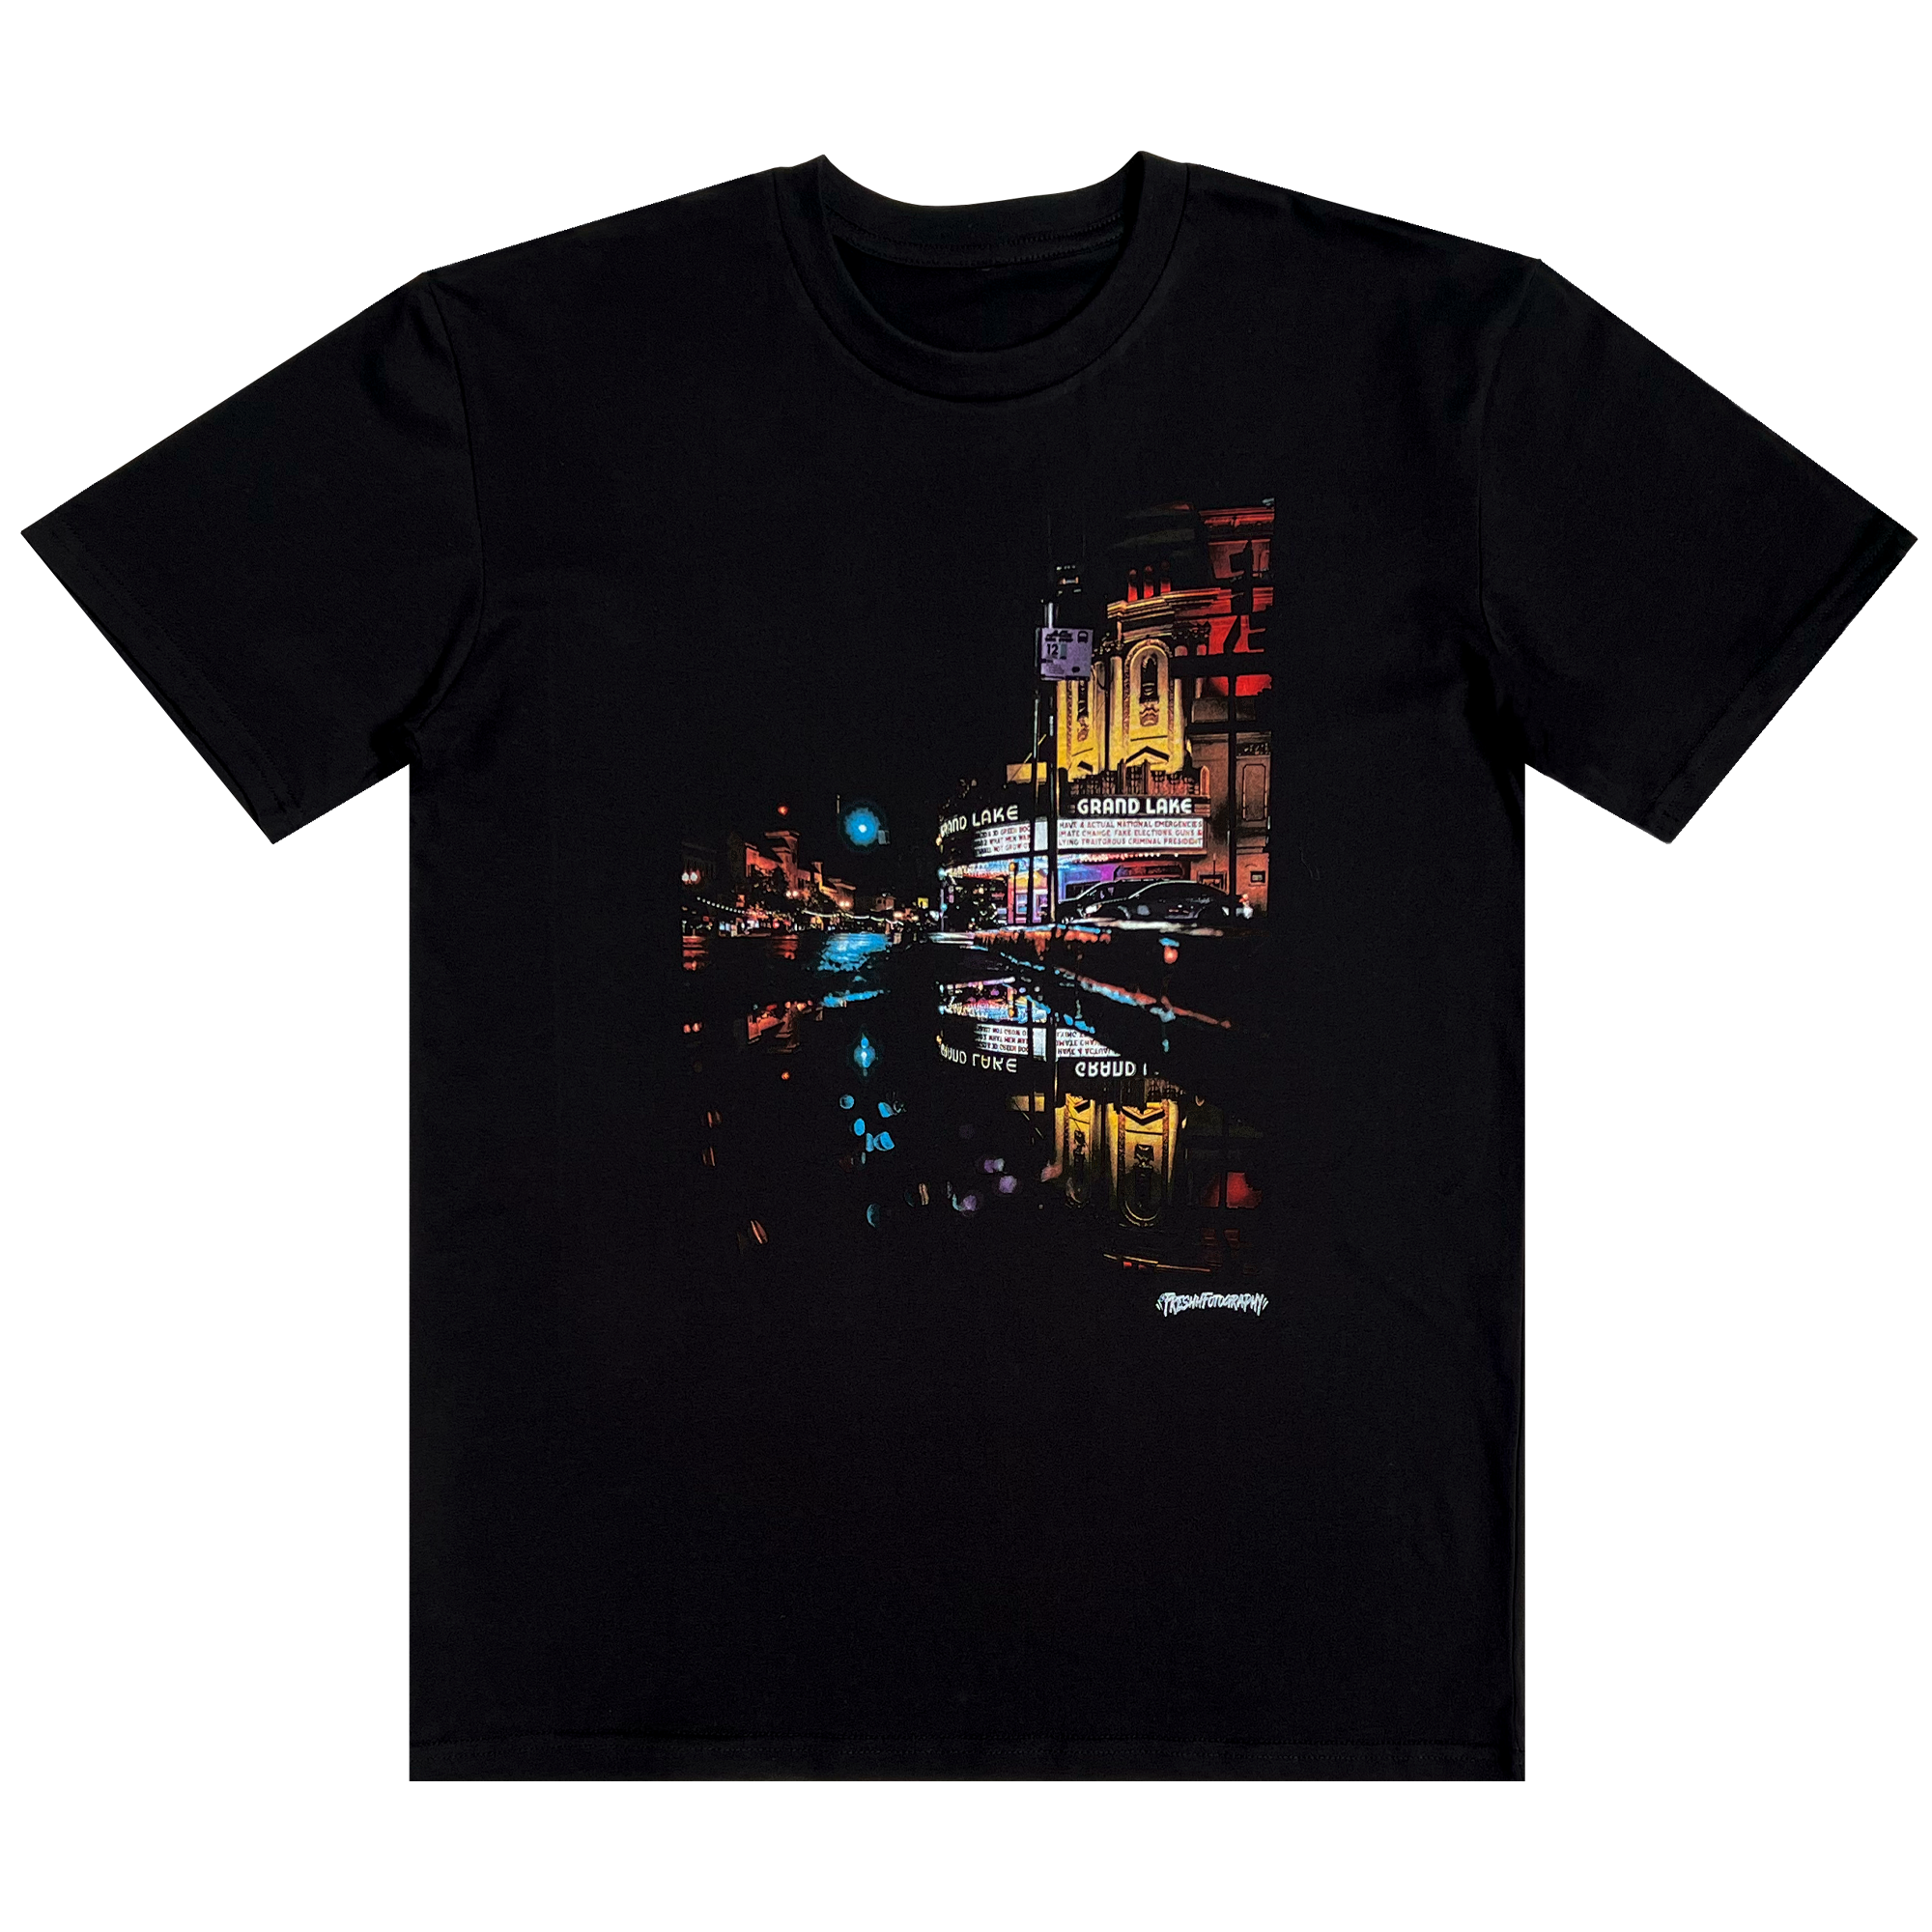 Front view of short sleeve black t-shirt with image of a rainy night reflecting street lights and The Grand Laker Theatre in Oakland.